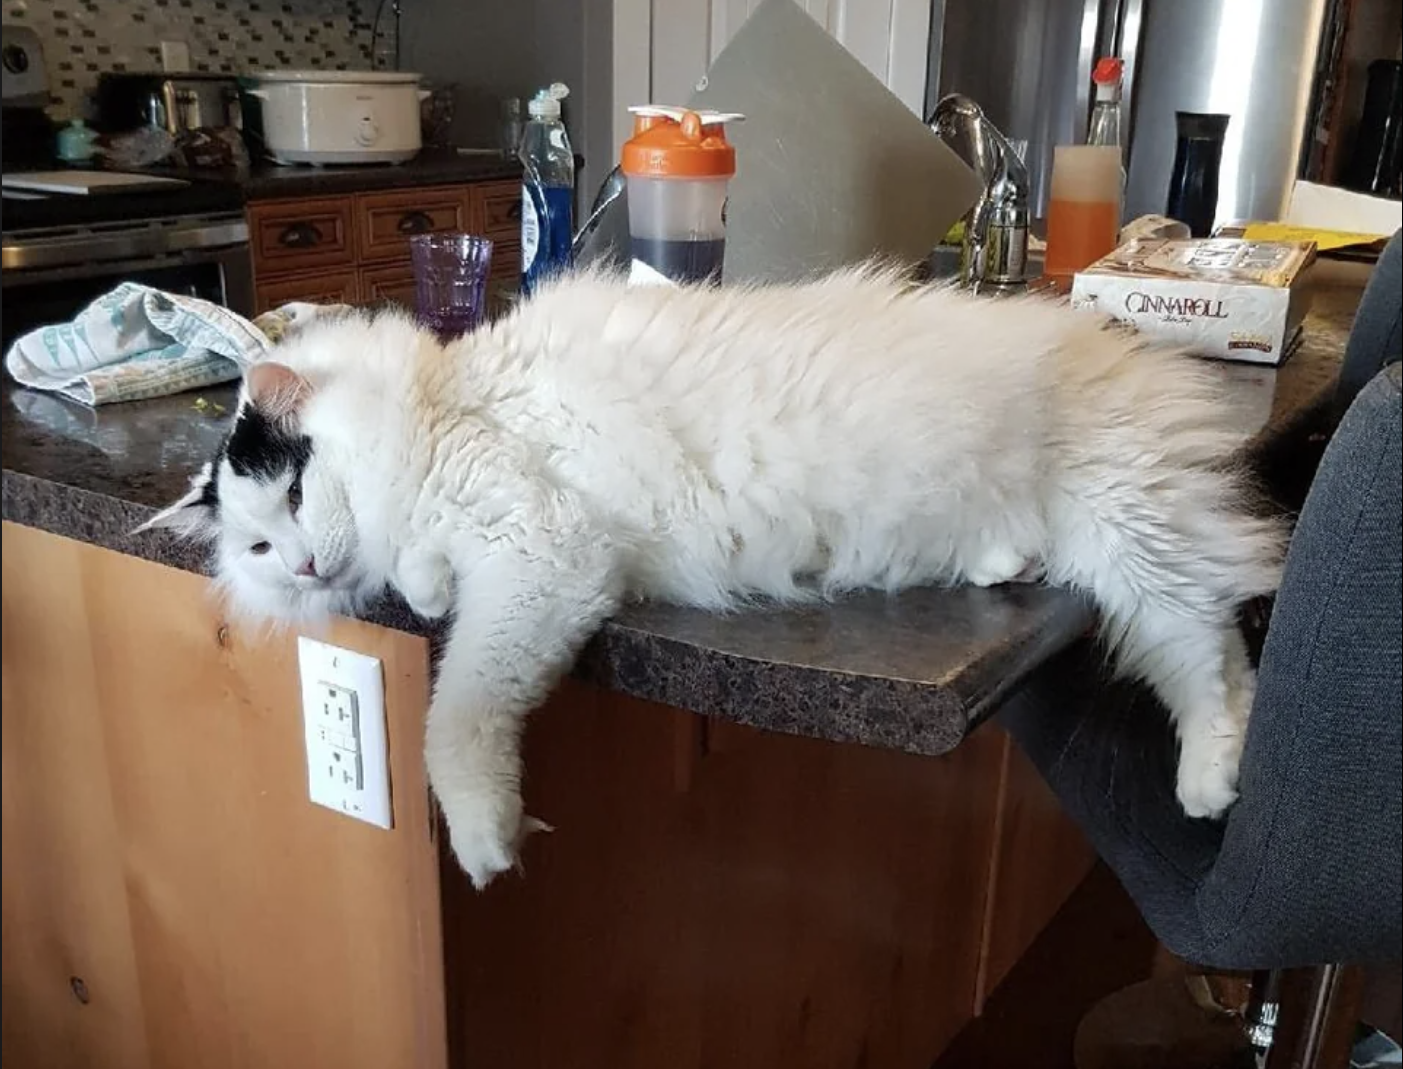 Large white dog sprawled across a kitchen counter next to a sink, with miscellaneous items around